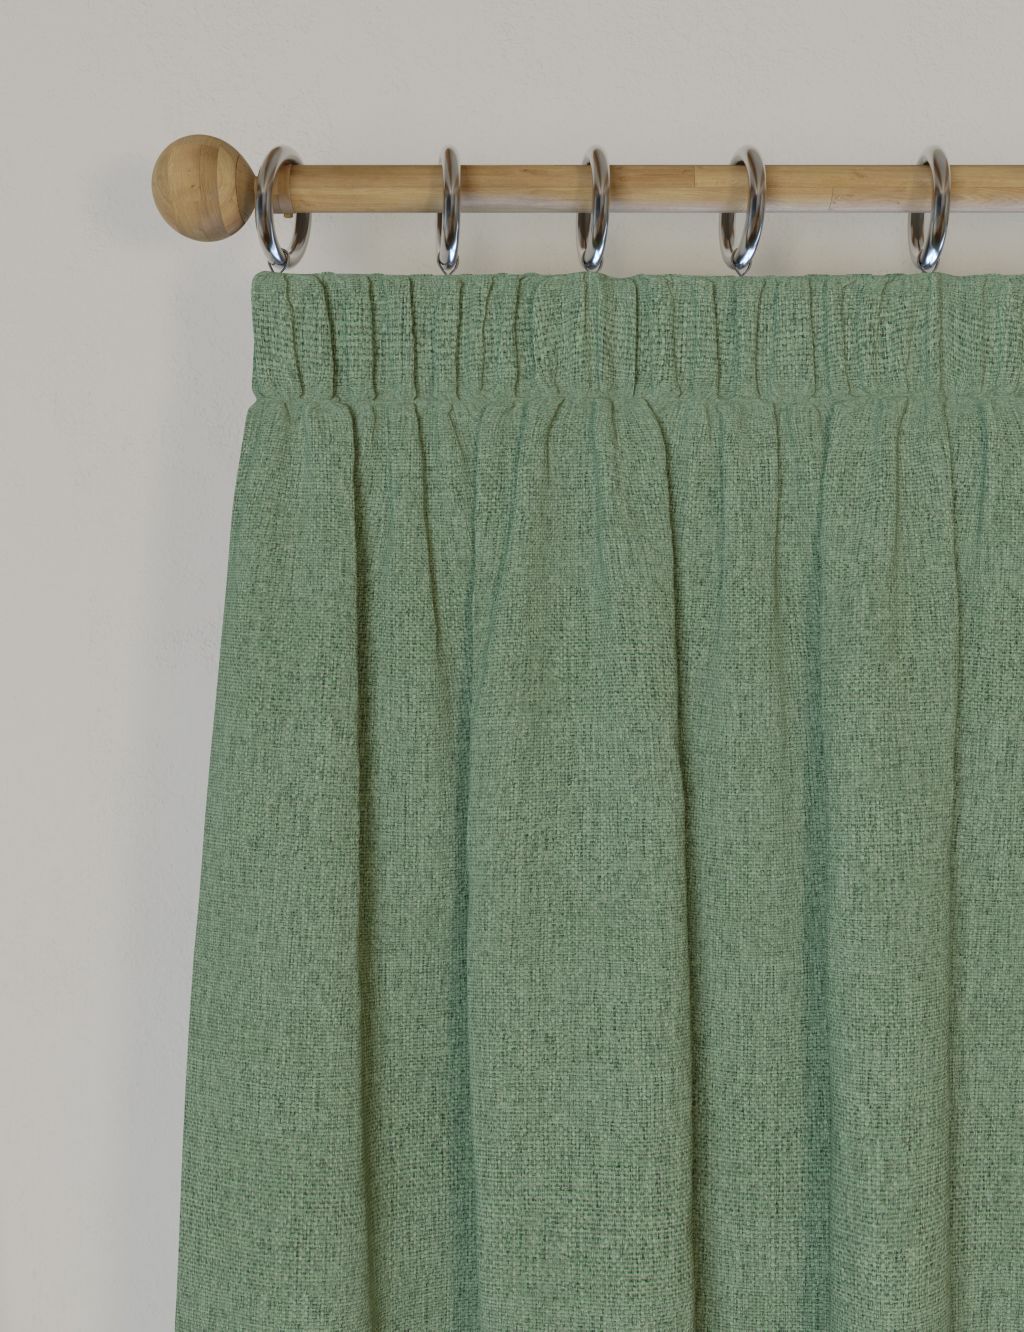 Brushed Pencil Pleat Blackout Thermal Curtains image 3